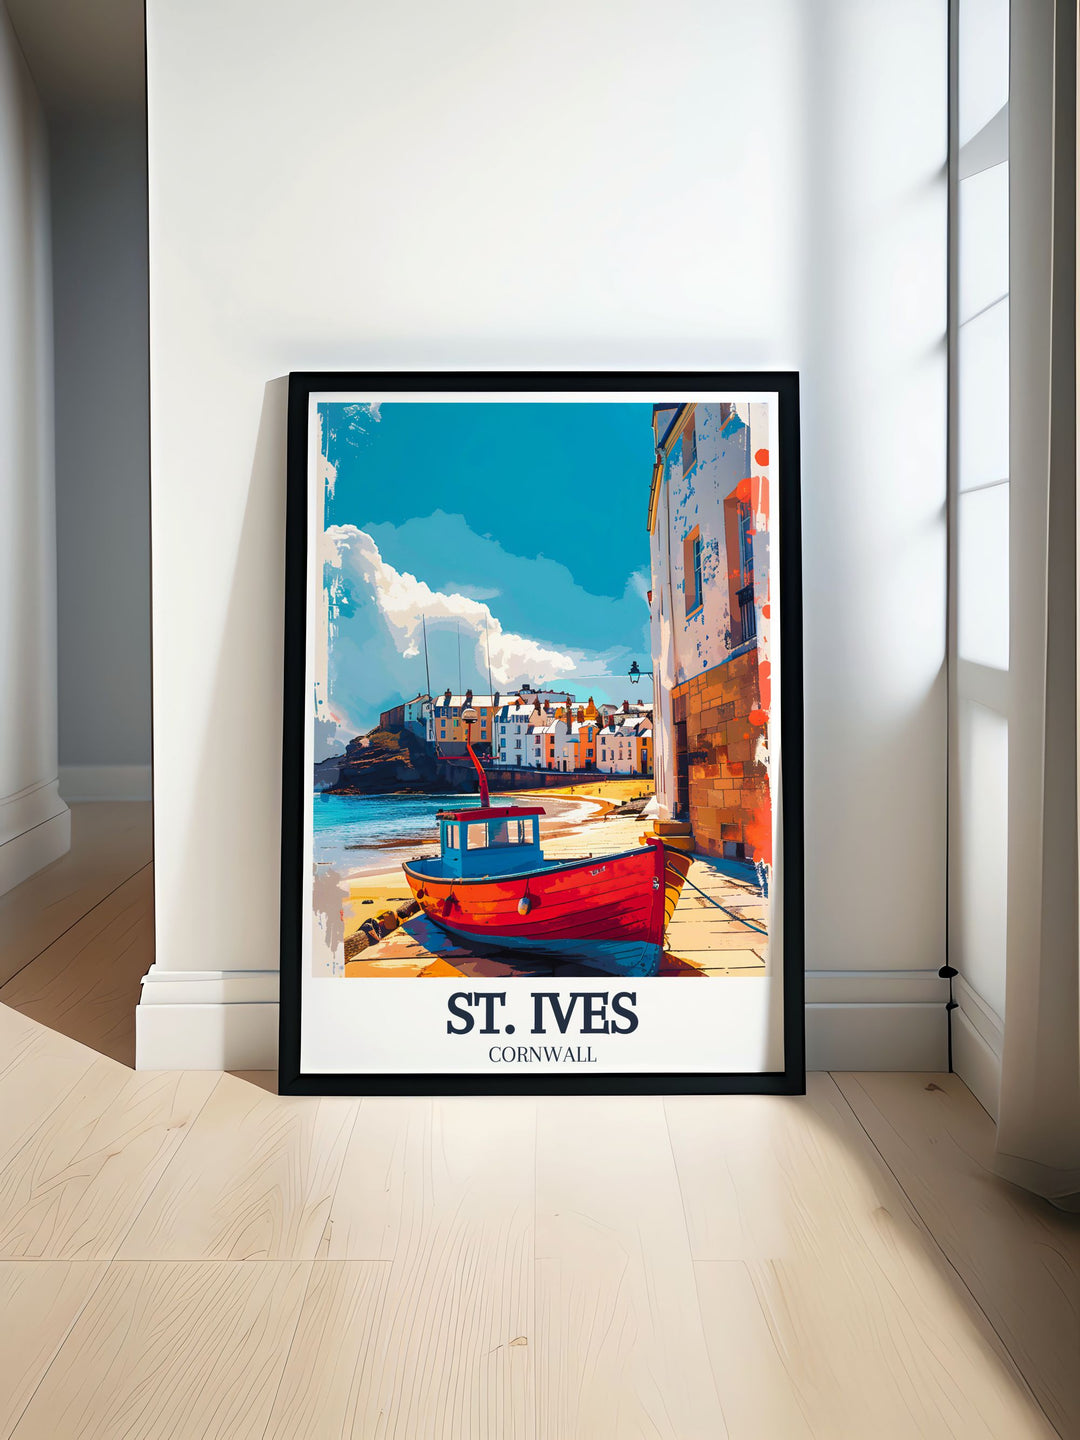 This travel poster of St. Ives and Porthmeor Beach captures the majestic landscapes and rich history of Cornwalls iconic destinations, ideal for any art collection.